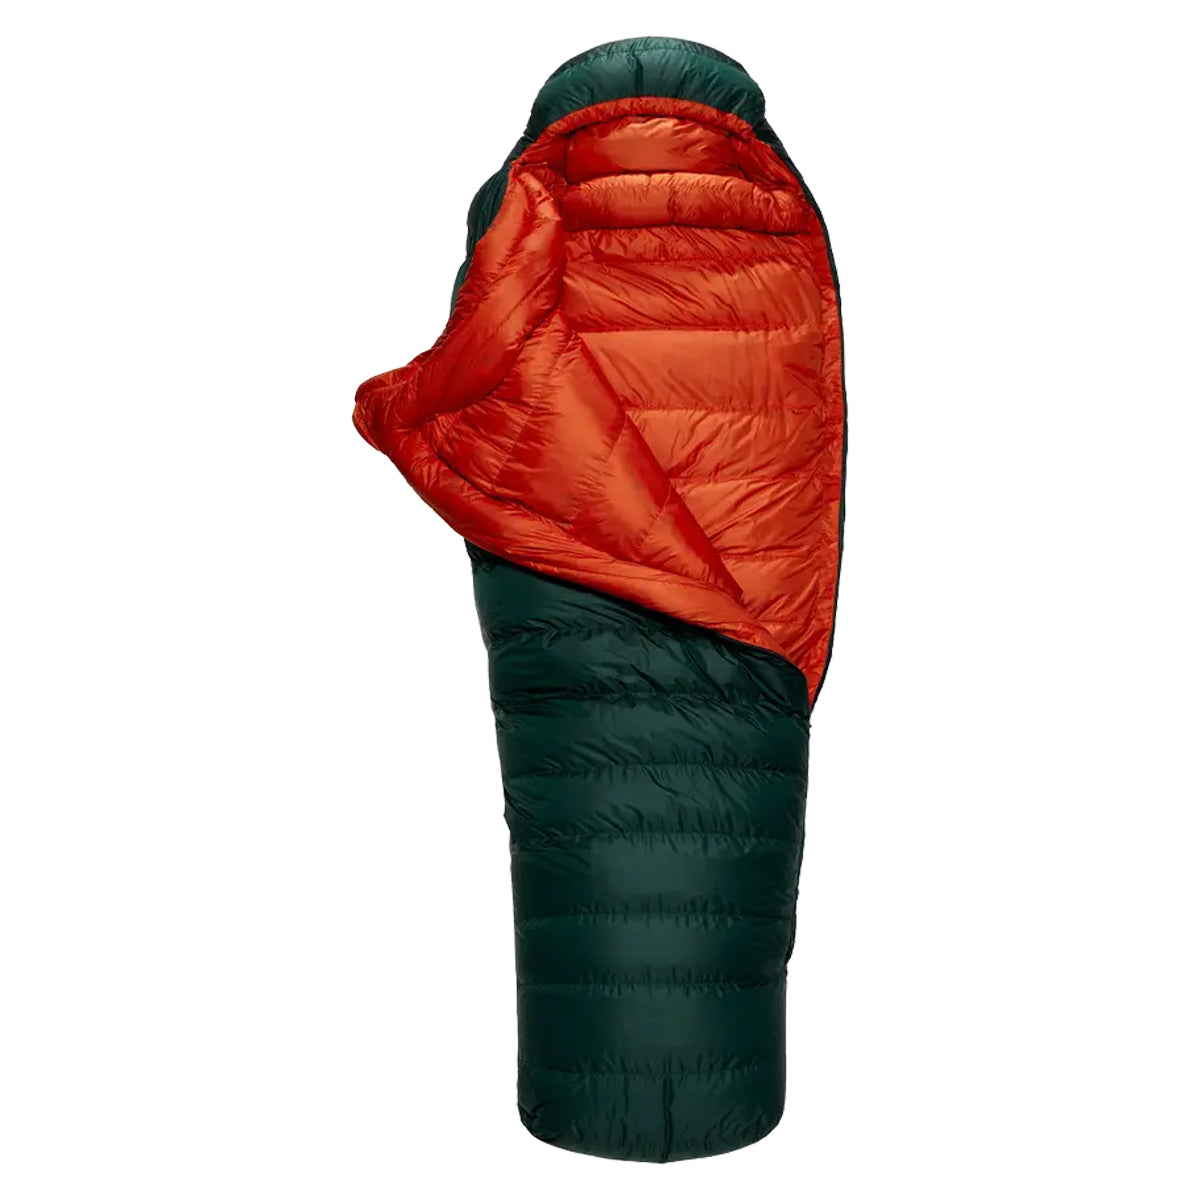 Rab Ascent 1100 Down Sleeping Bag in  by GOHUNT | Rab - GOHUNT Shop